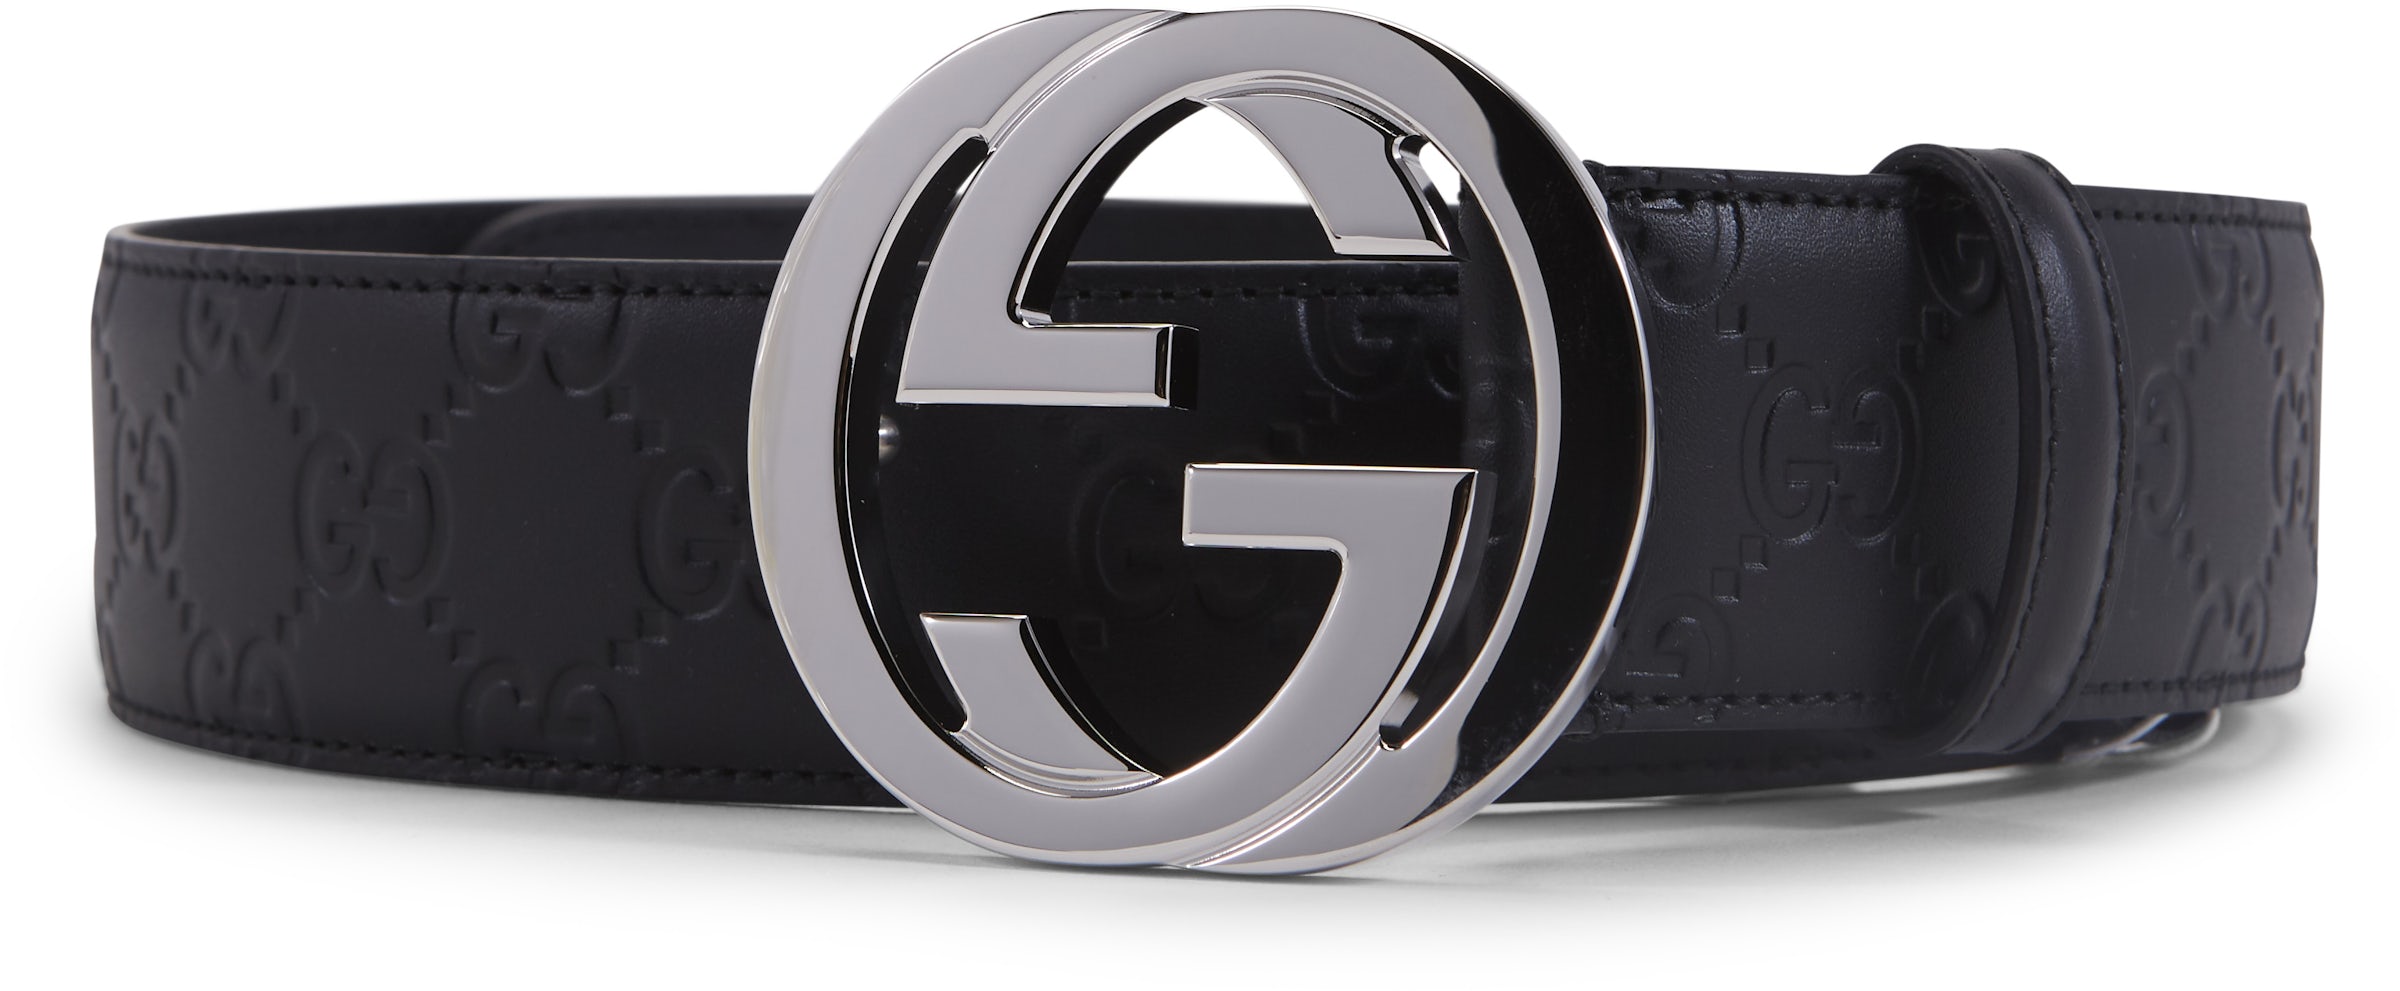 Gucci belt real vs fake review. How to spot original Gucci GG gucissima  belts 